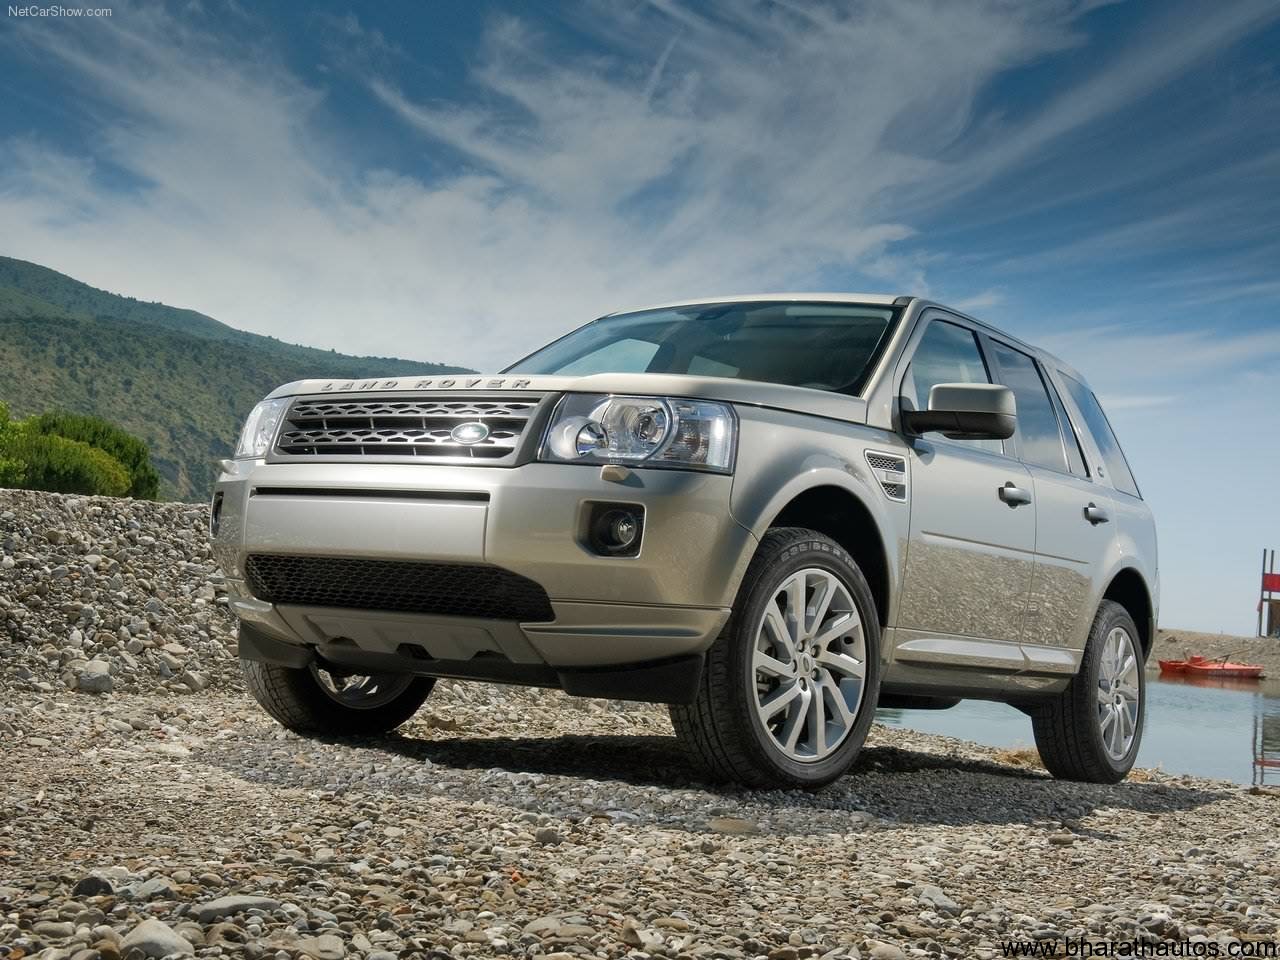 2011 land rover freelander 2 launched in india